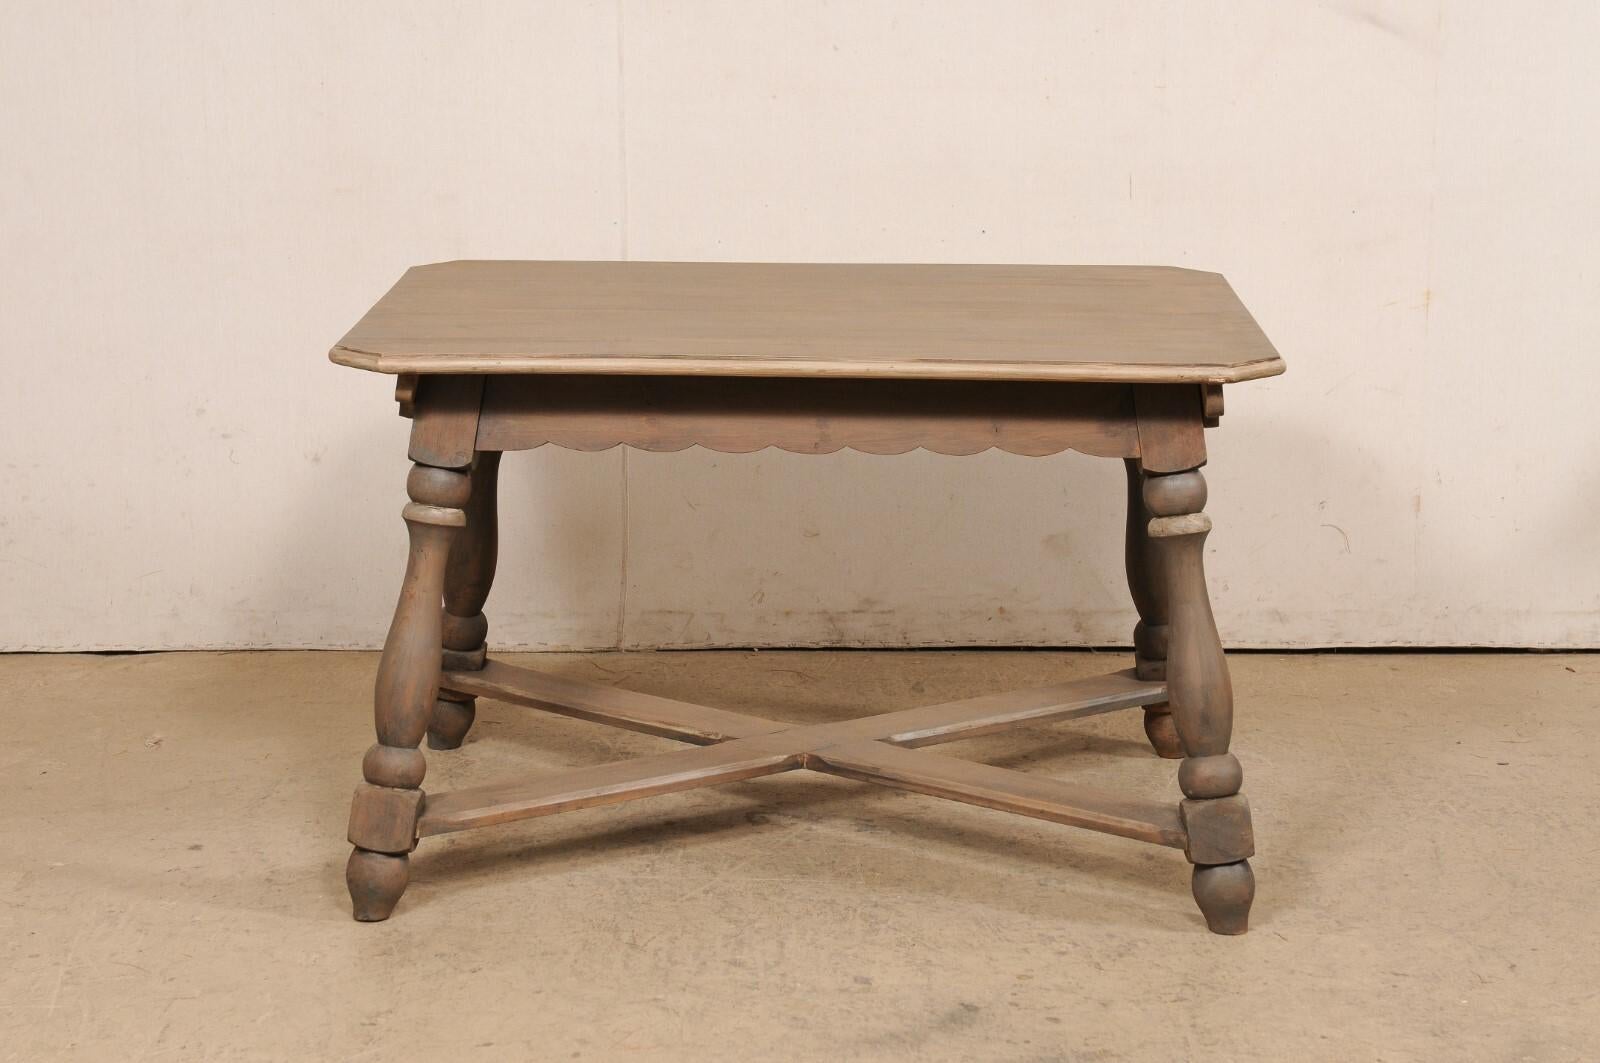 European Wooden Table w/Scalloped Apron, Nicely Turned Legs & X-Stretcher For Sale 7